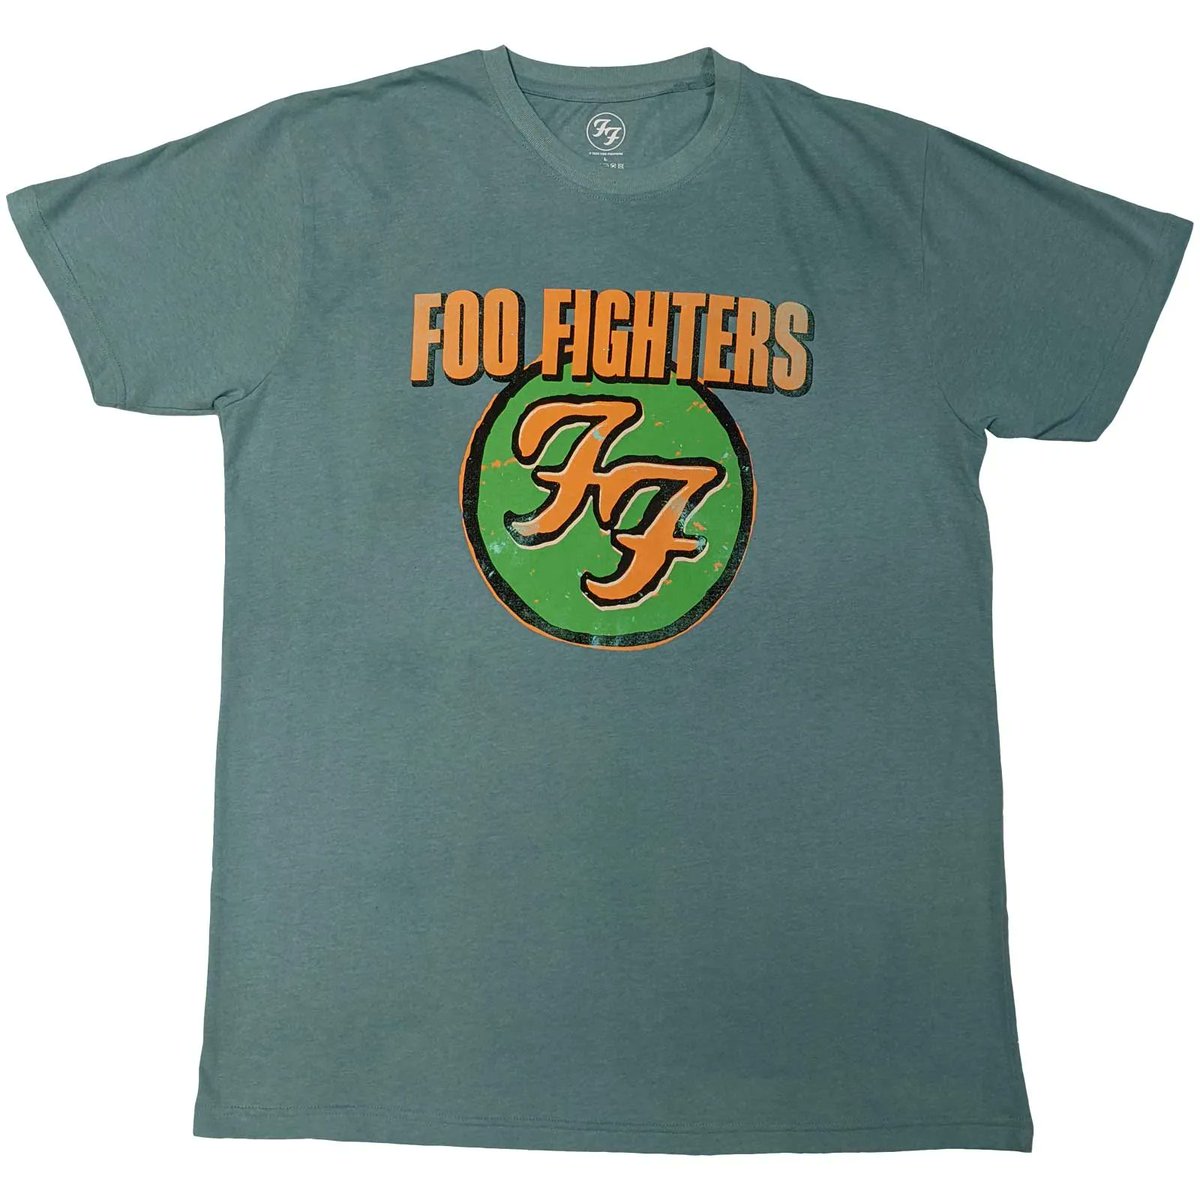 An official licensed Foo Fighters Unisex T-Shirt featuring the 'Graff' design motif, available in blue colourway.

#rockoff #foofighters #official #merchandise #tyedye #tshirt #licensed #bandmerch